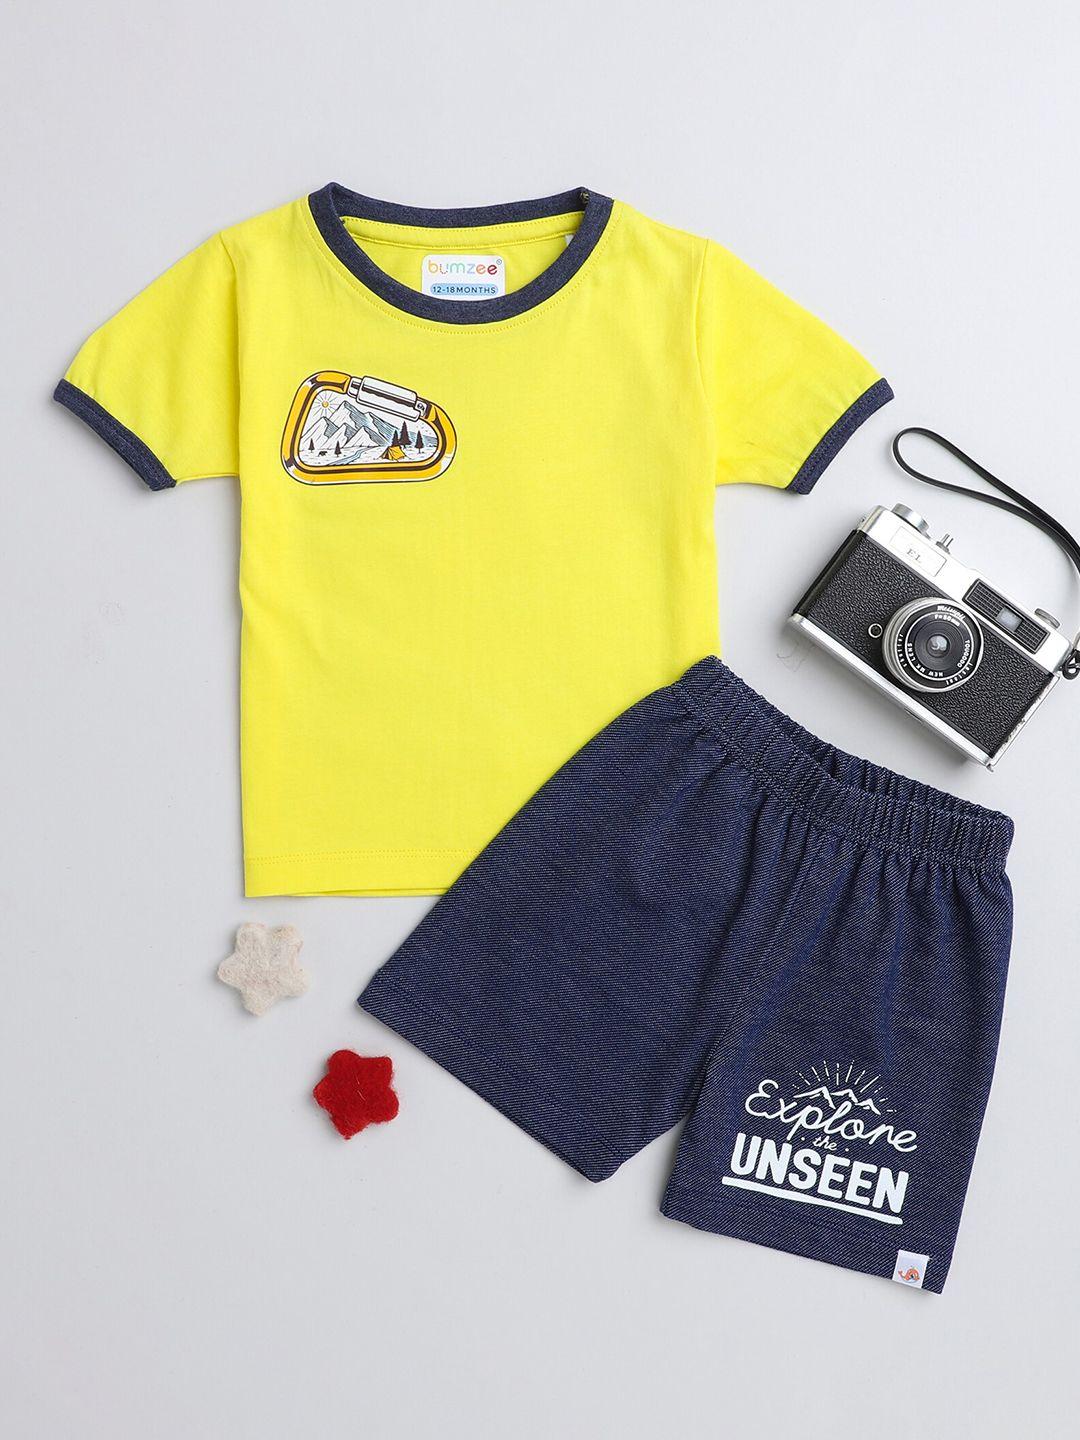 bumzee-boys-navy-blue-&-white-printed-t-shirt-with-shorts